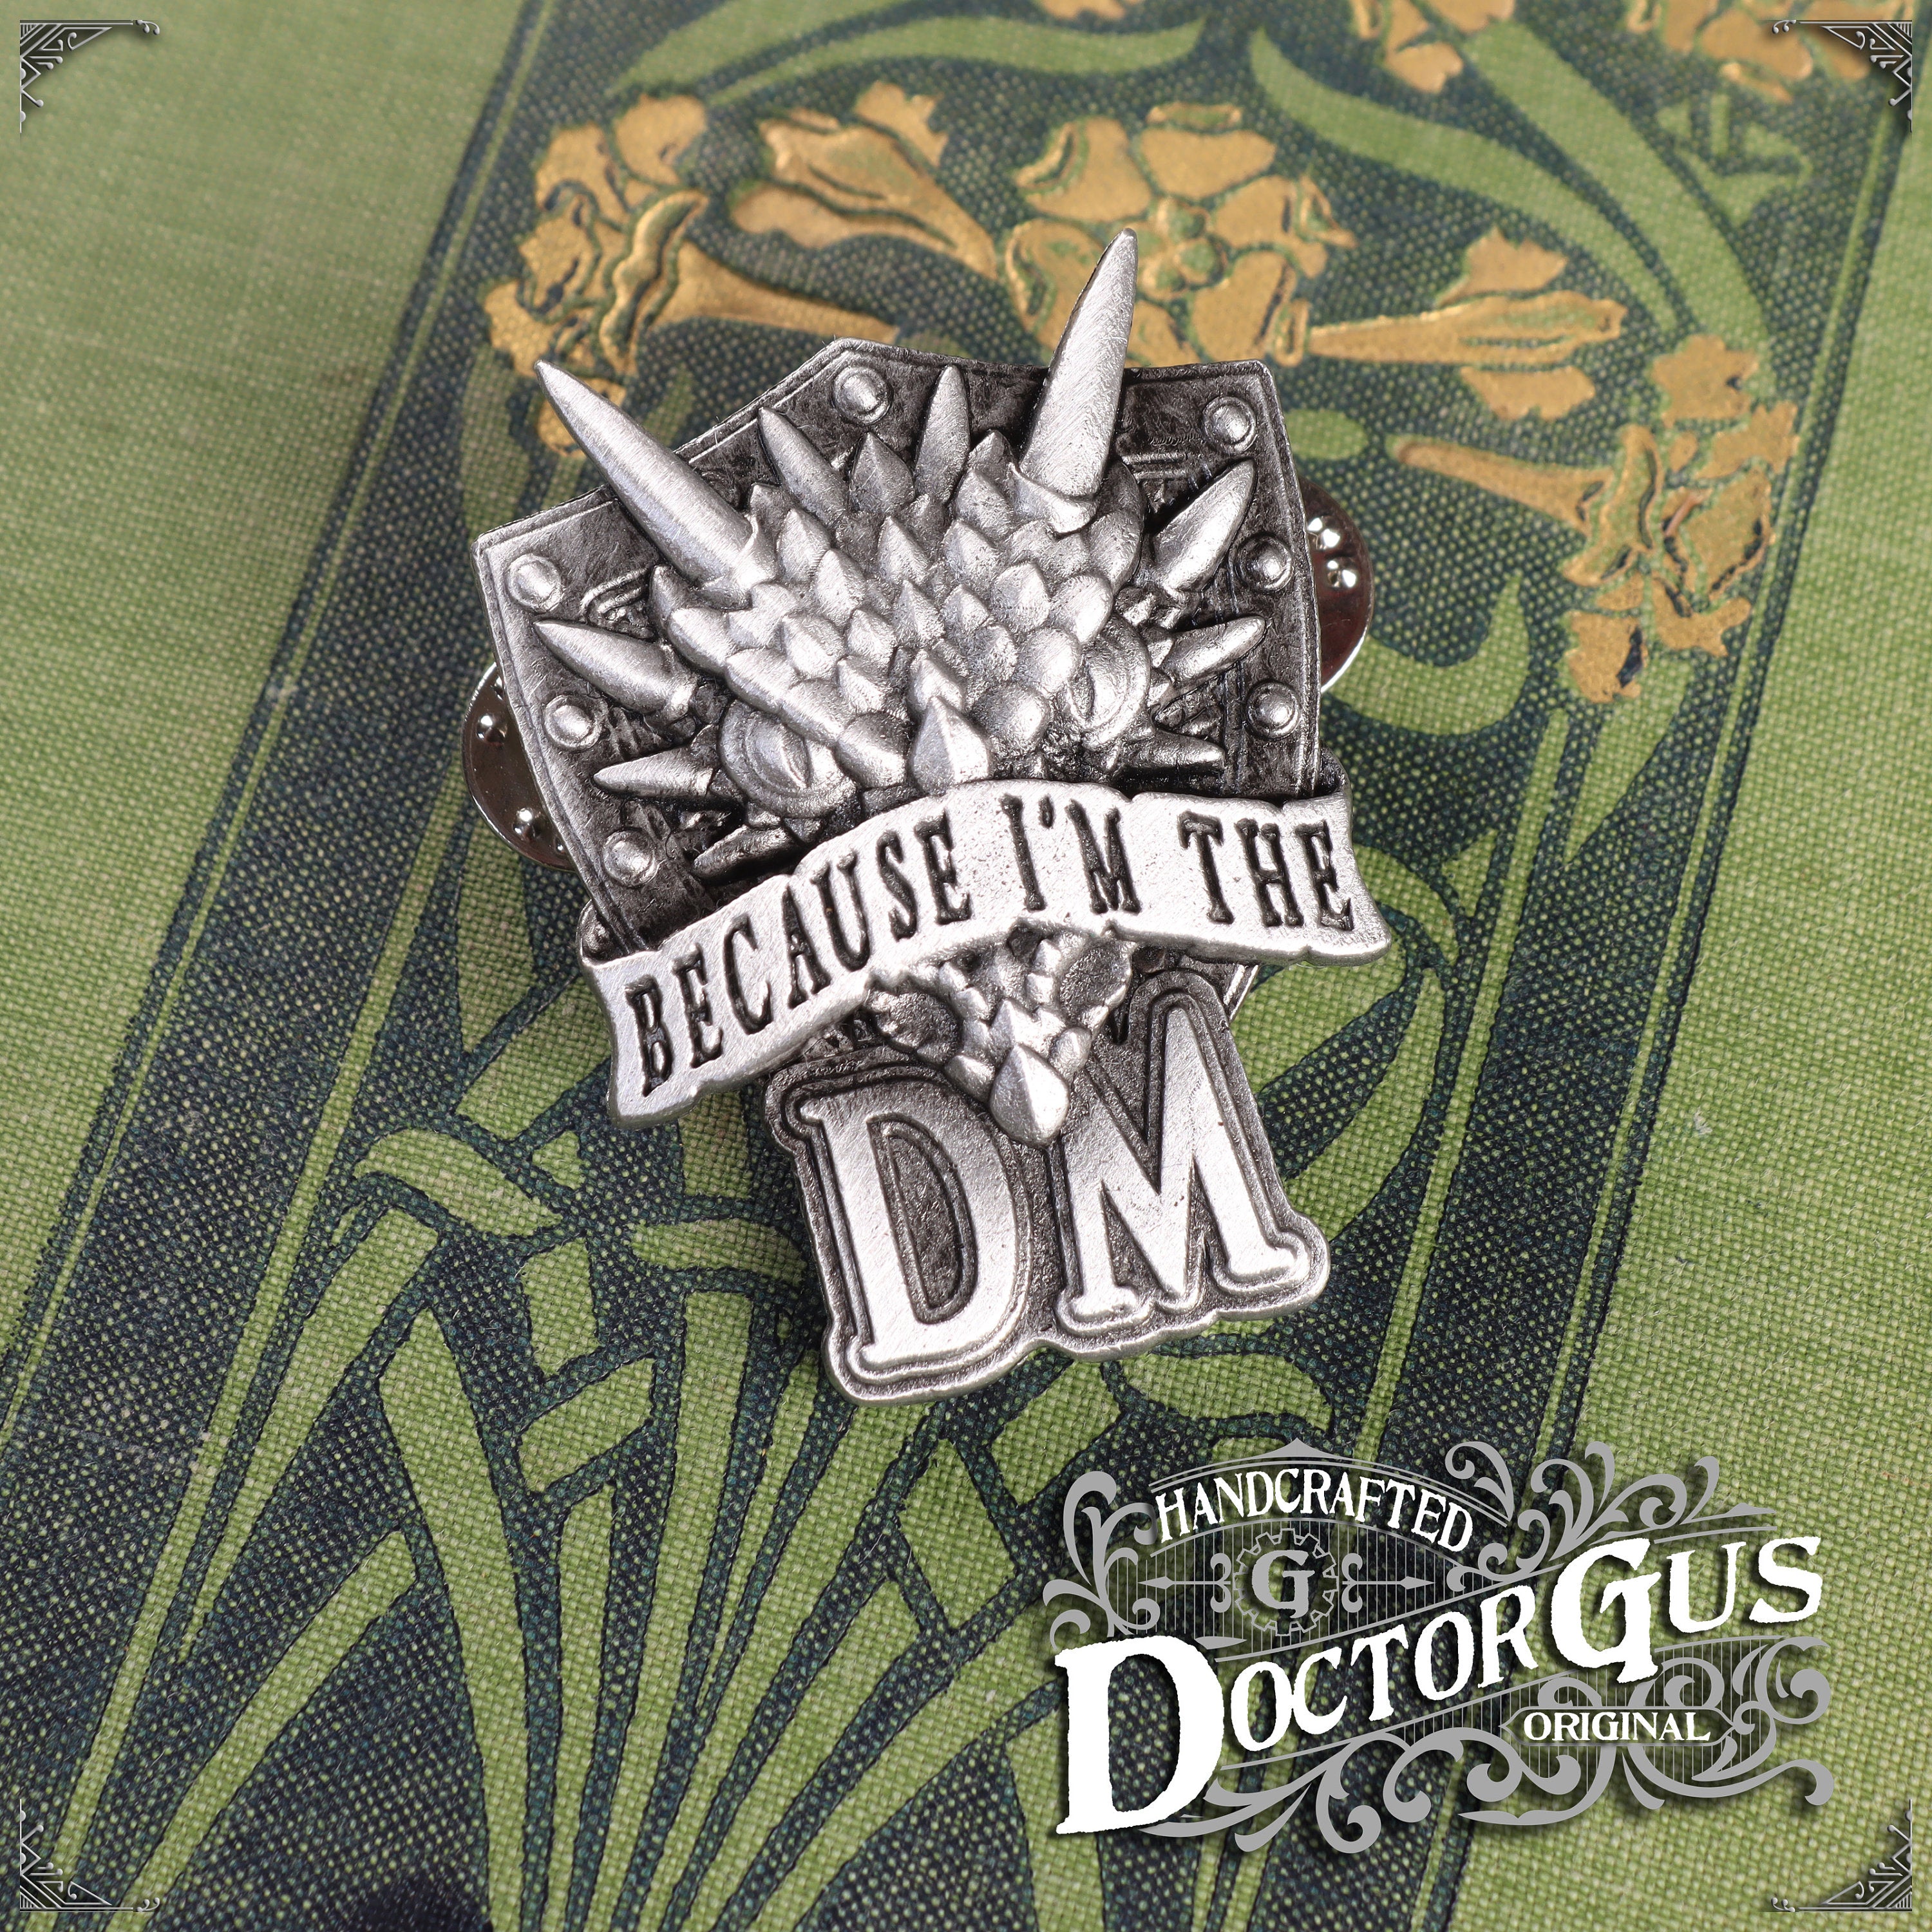 Because I'm the DM Badge